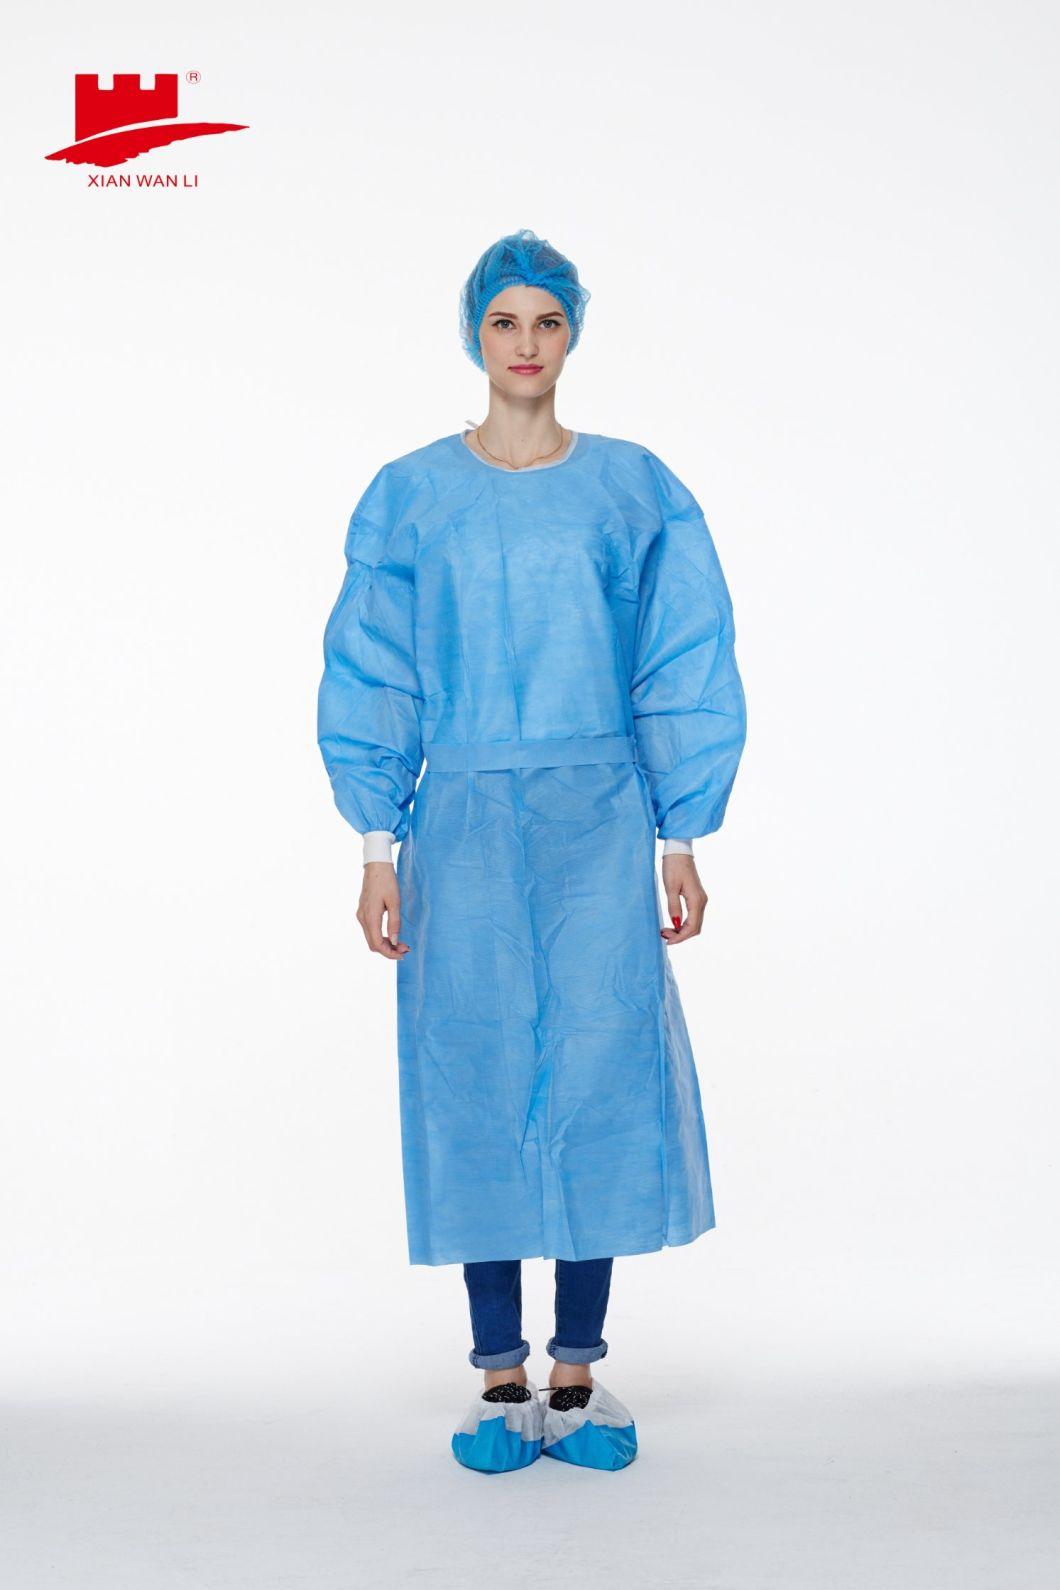 Disposable Medical Surgical Reinforced SMS/PP PE/CPE/PP Srub Suit/ Coveralls AAMI Level 2/3/4 Protective Clothing Lab Coat Isolation Gown for Hospital/Clinics